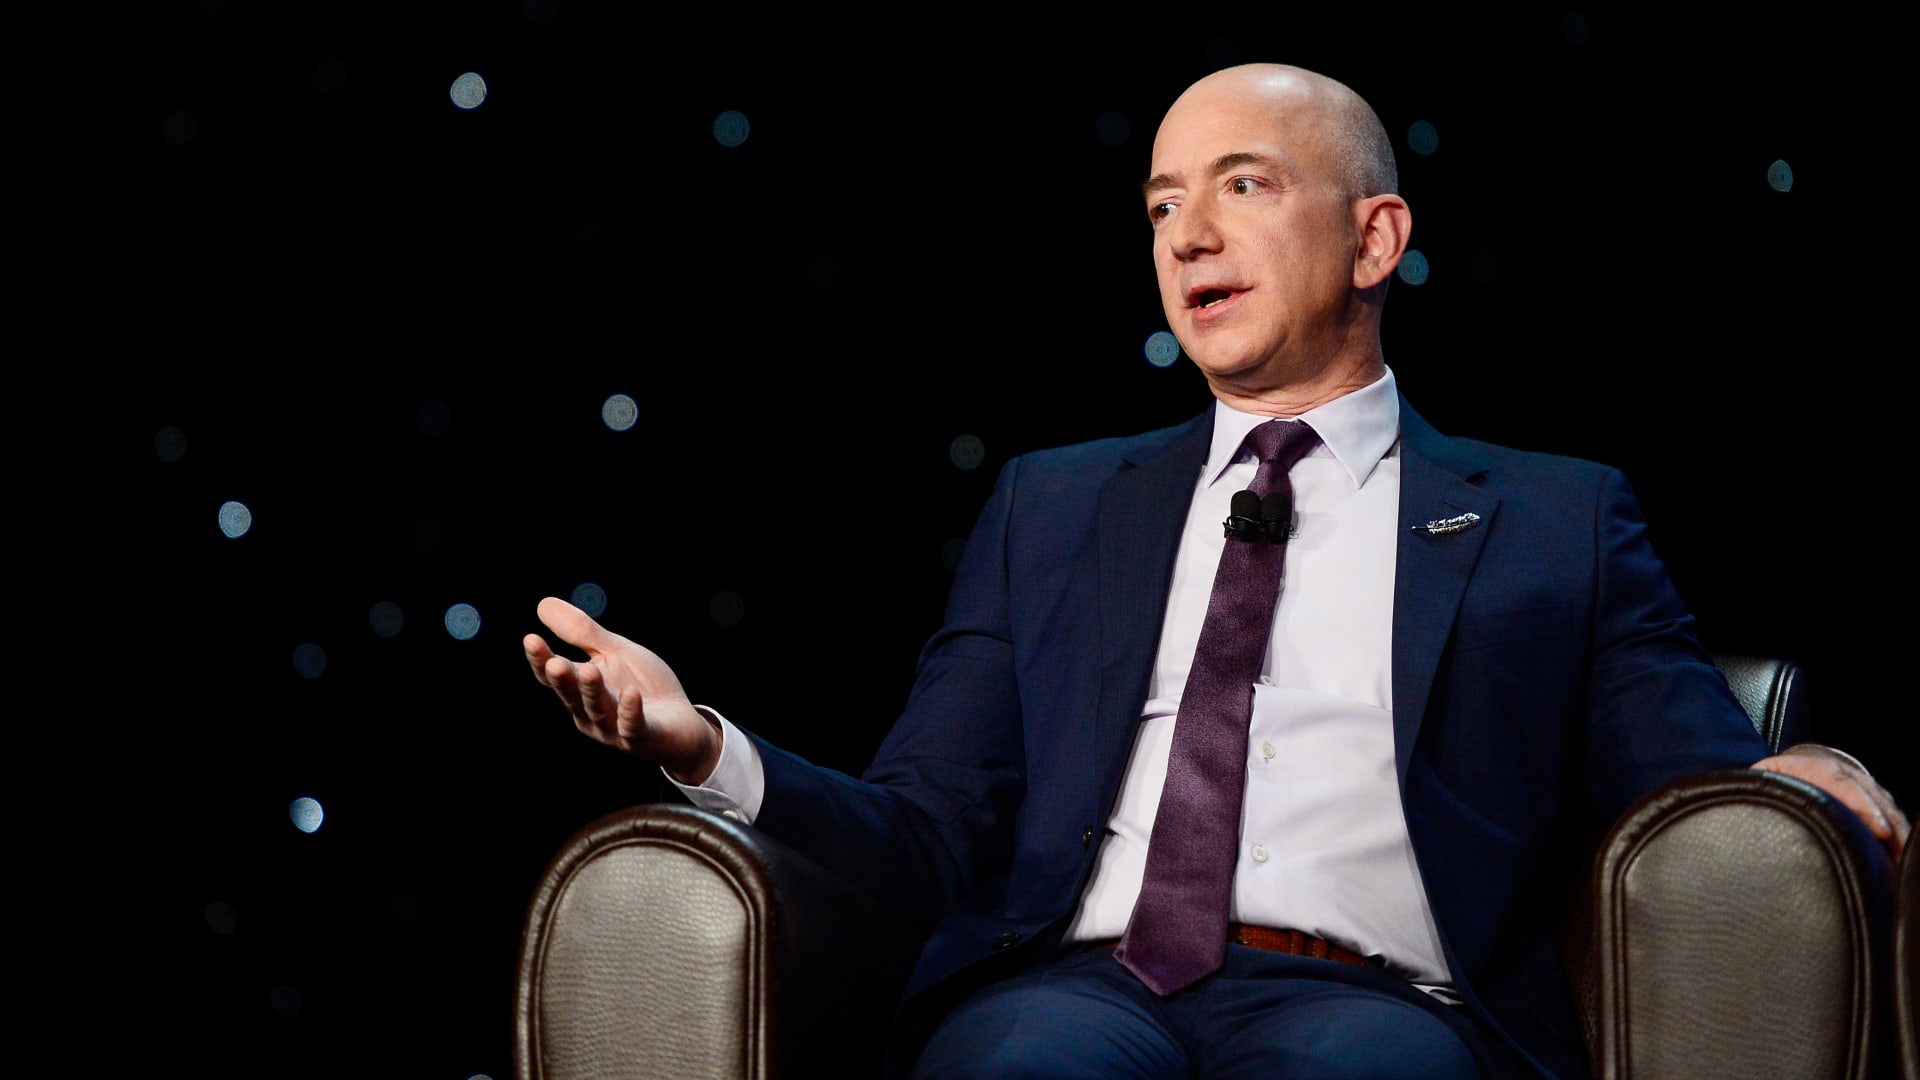 Amazon is trying to soften its image as regulatory scrutiny of Big Tech grows